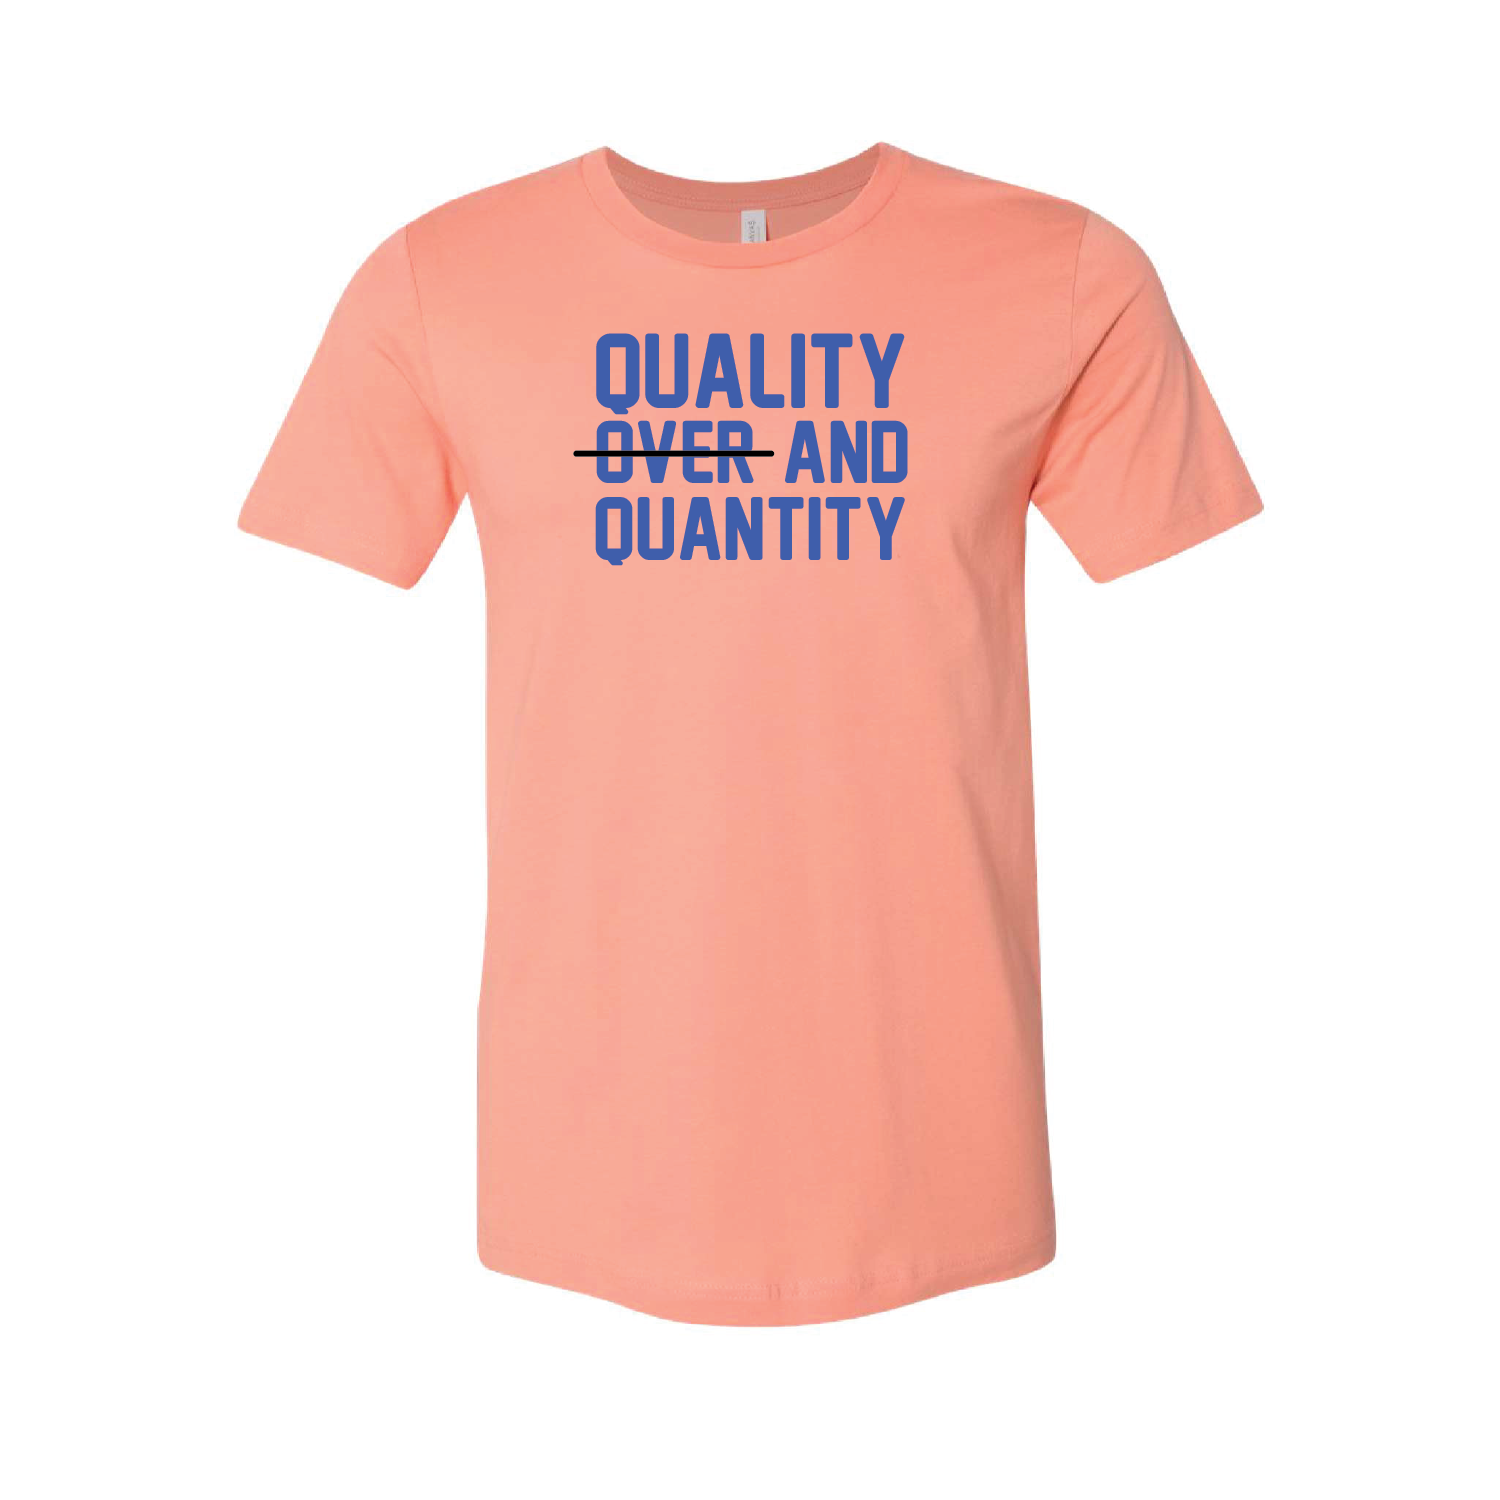 MCOR Tee - Special Edtion "Quantity AND Quality" Tee